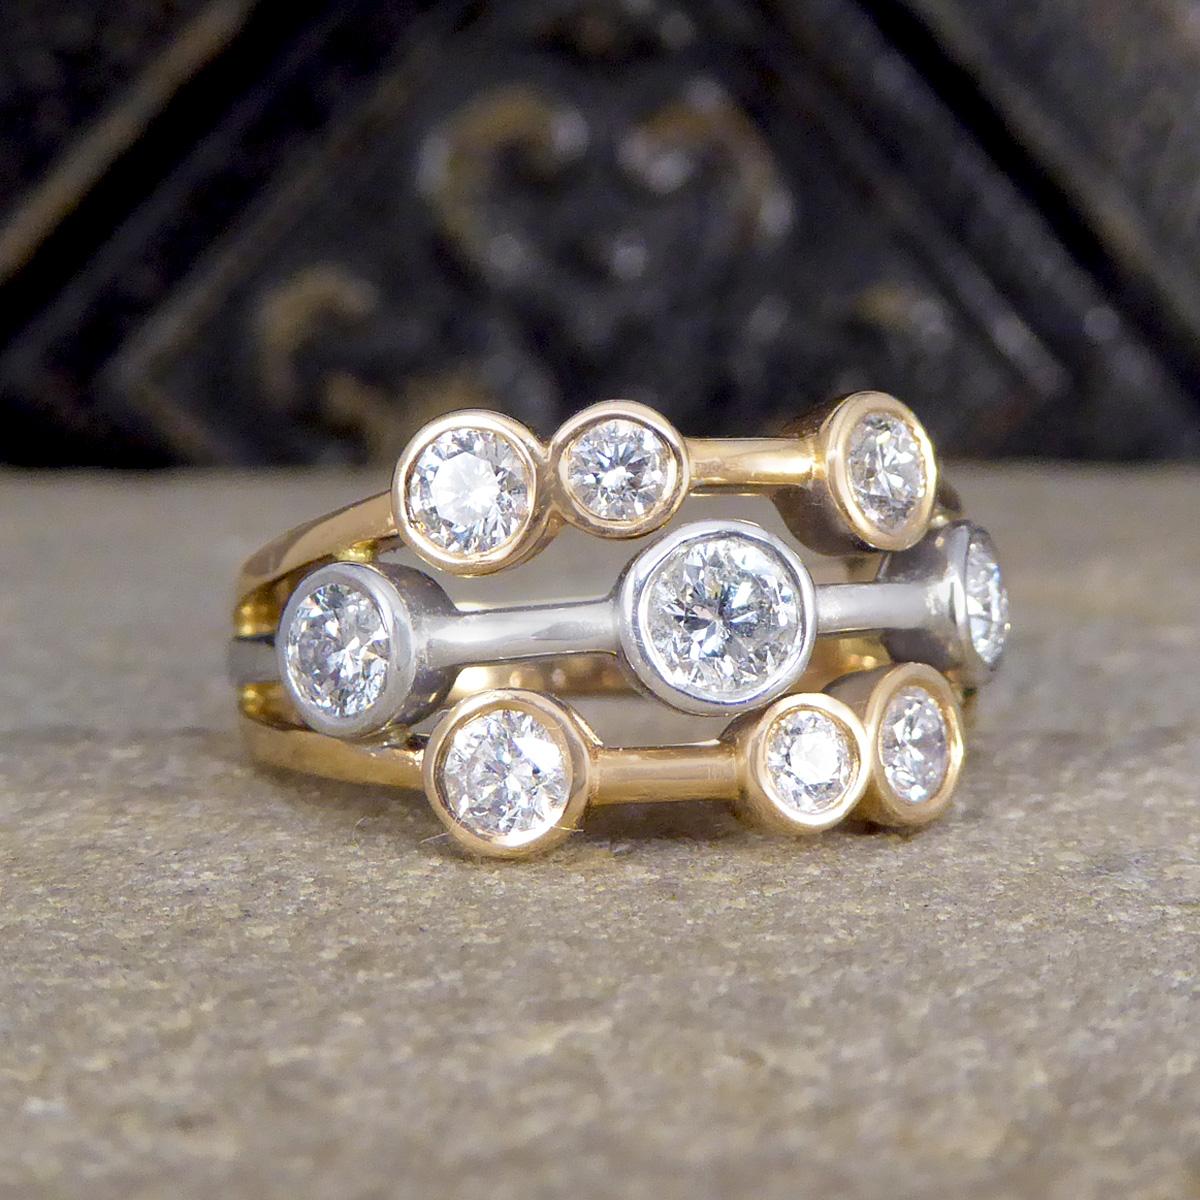 A beautifully and bubbly ring. This bubble ring has nine different sized Diamonds spread evenly along three strands creating a sparkle across the whole head of the finger. There are a total of 0.90ct Modern Brilliant Cut Diamonds that are bright and